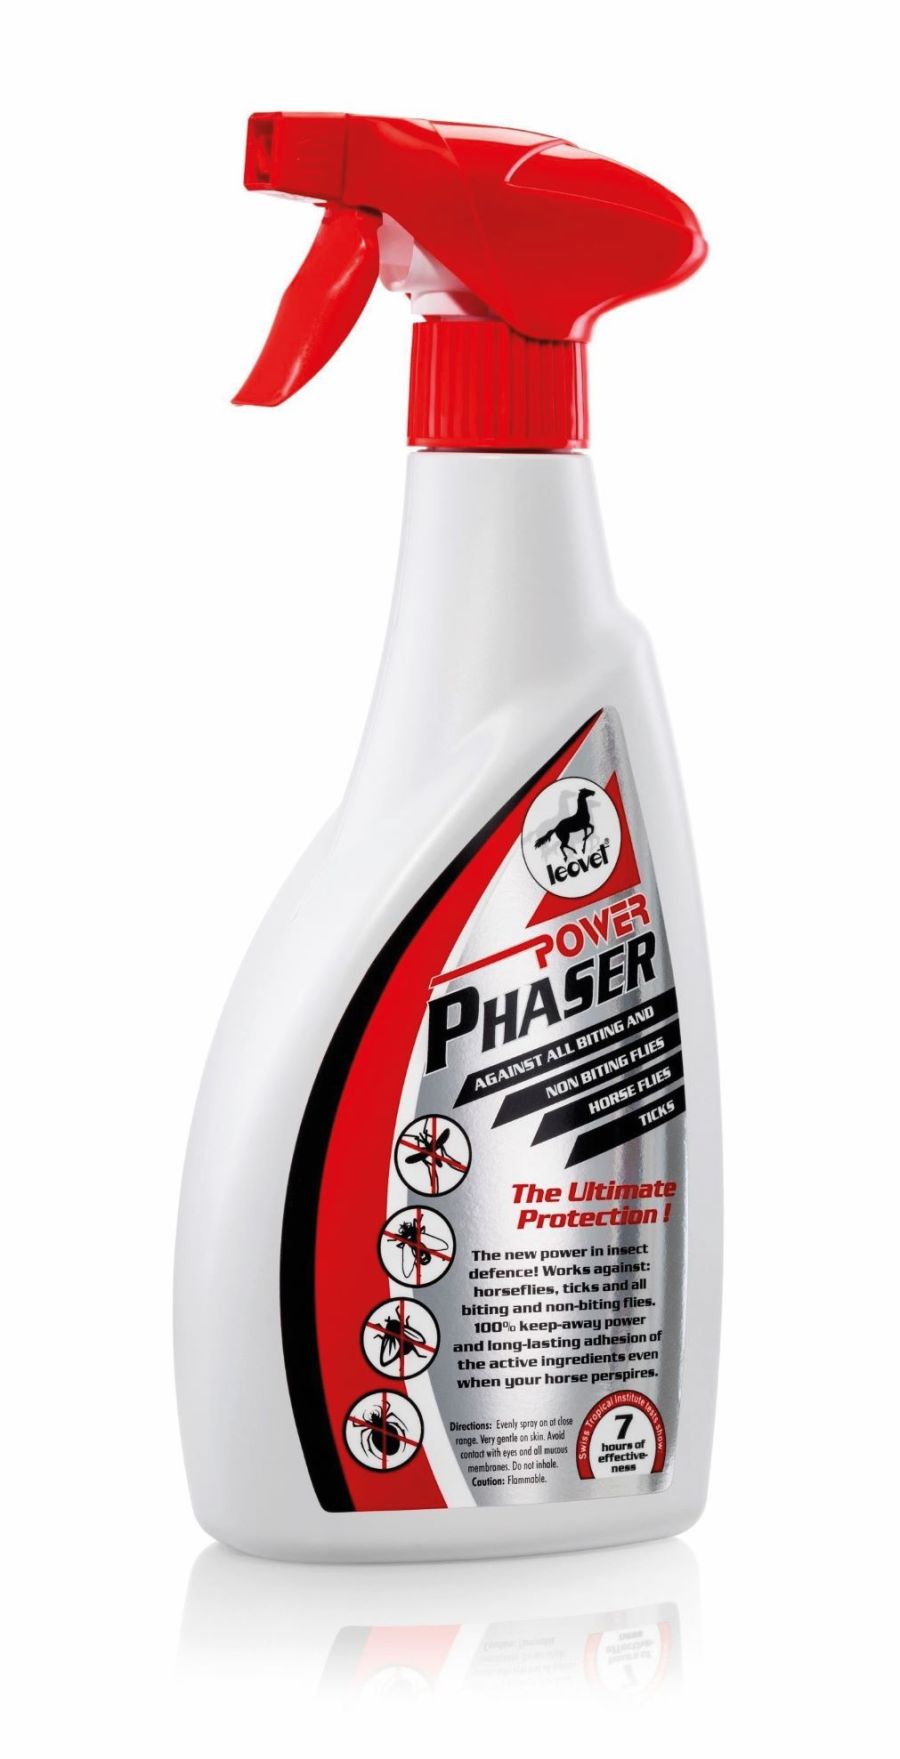 Pictured is the Leovet Power Phaser, a fly spray for horses